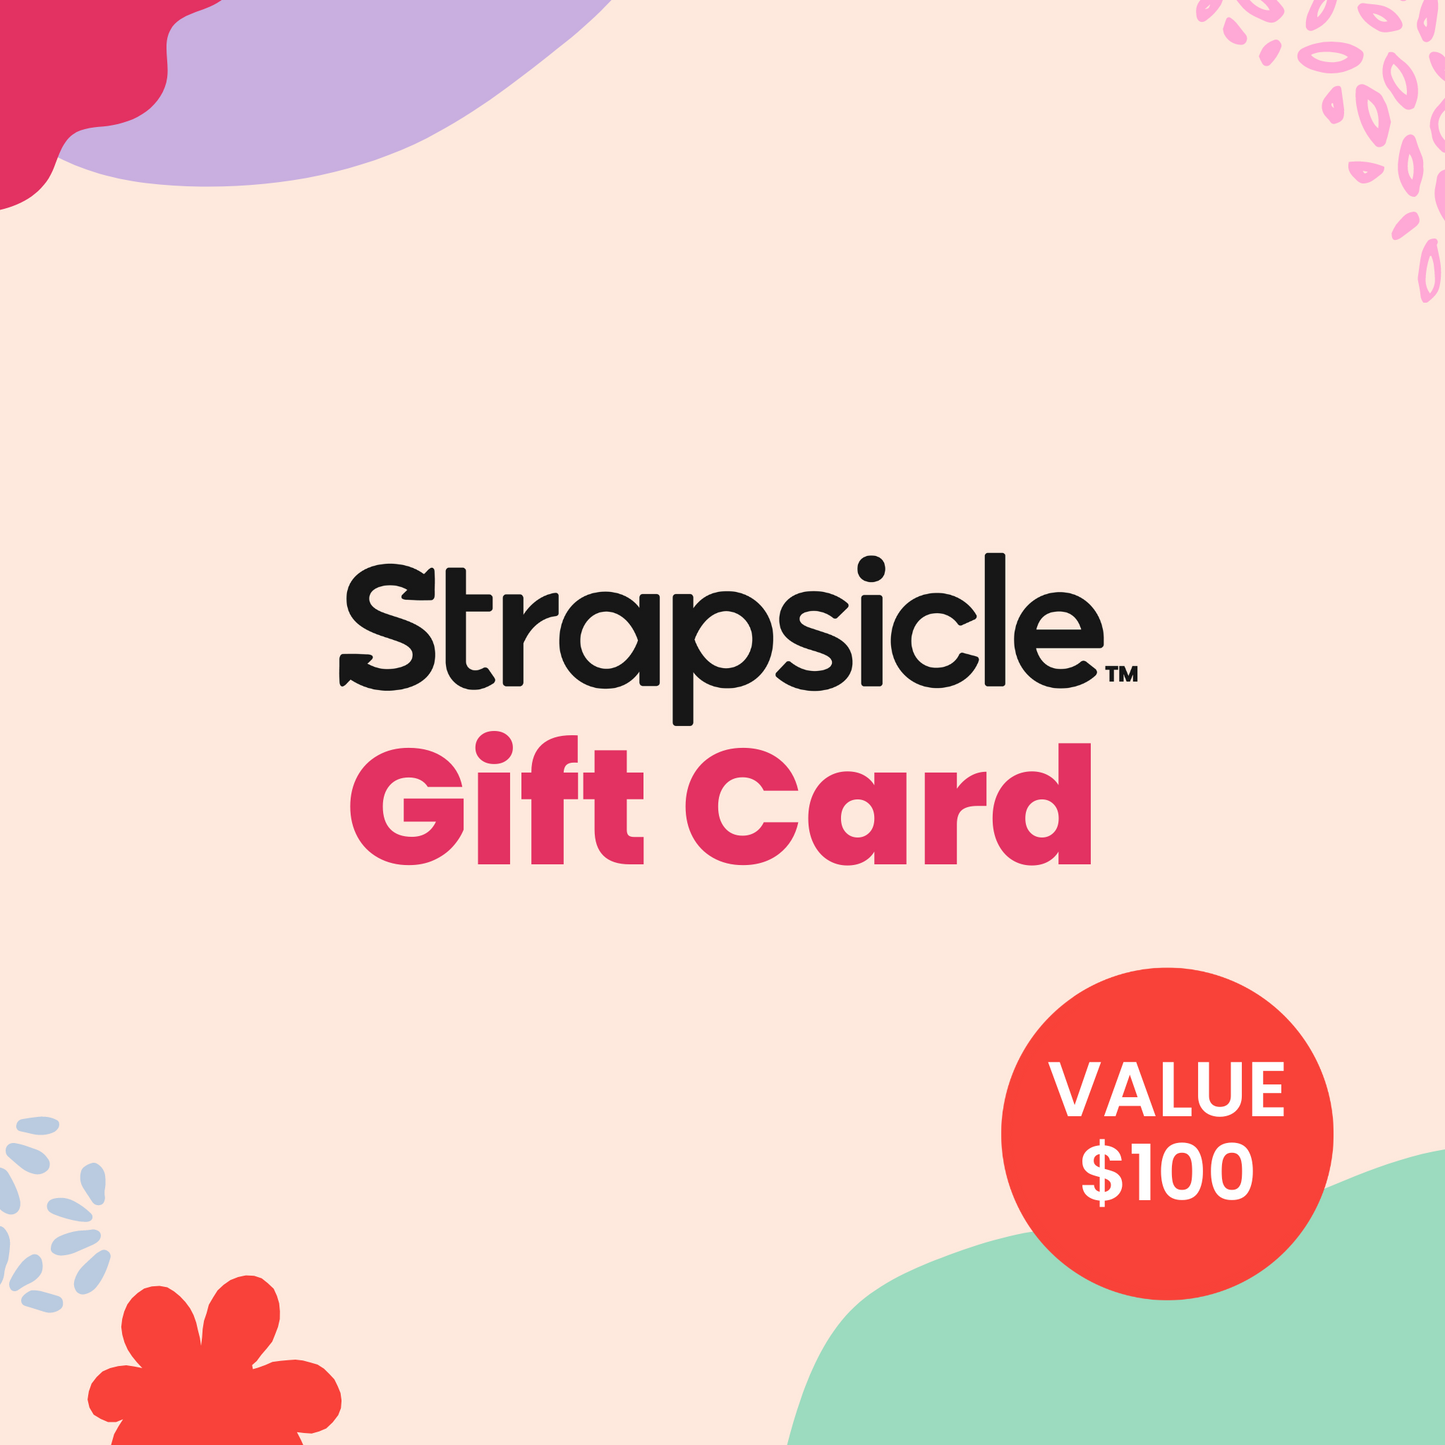 Strapsicle Gift Card